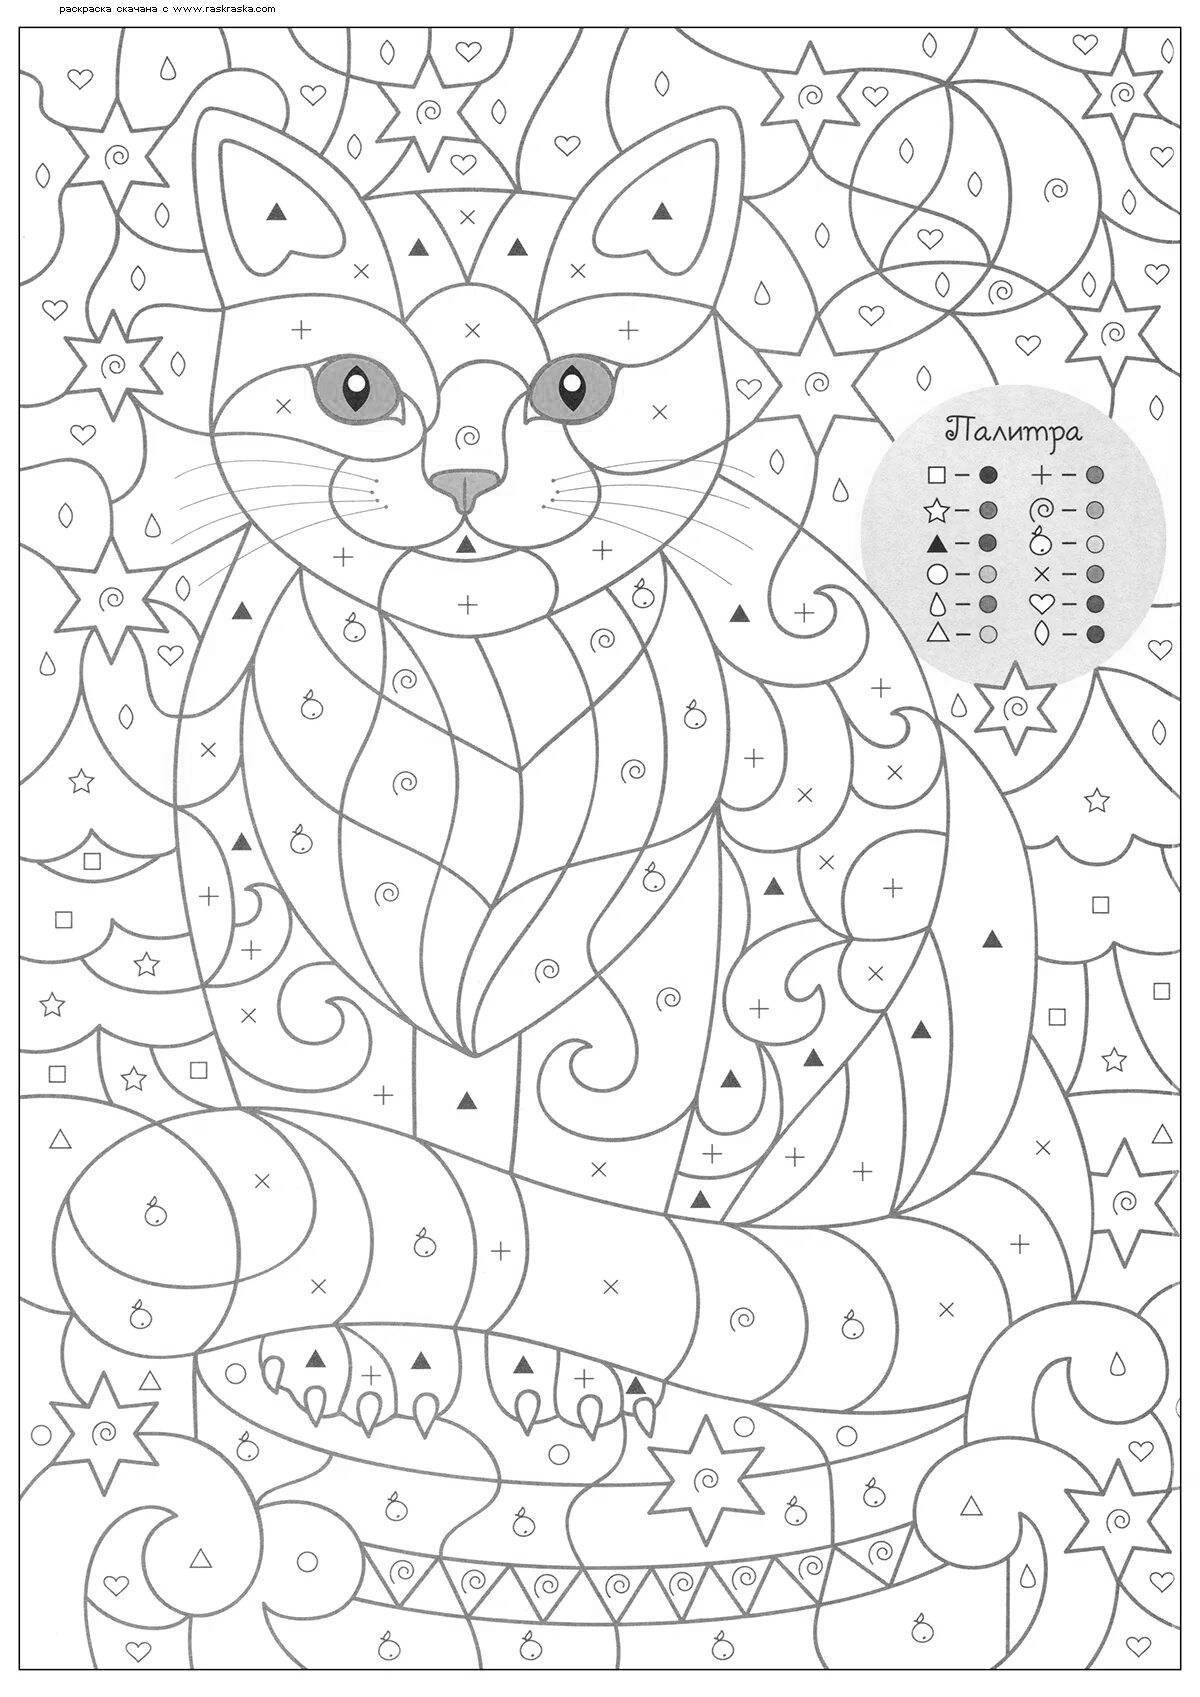 Colorful cat coloring by numbers